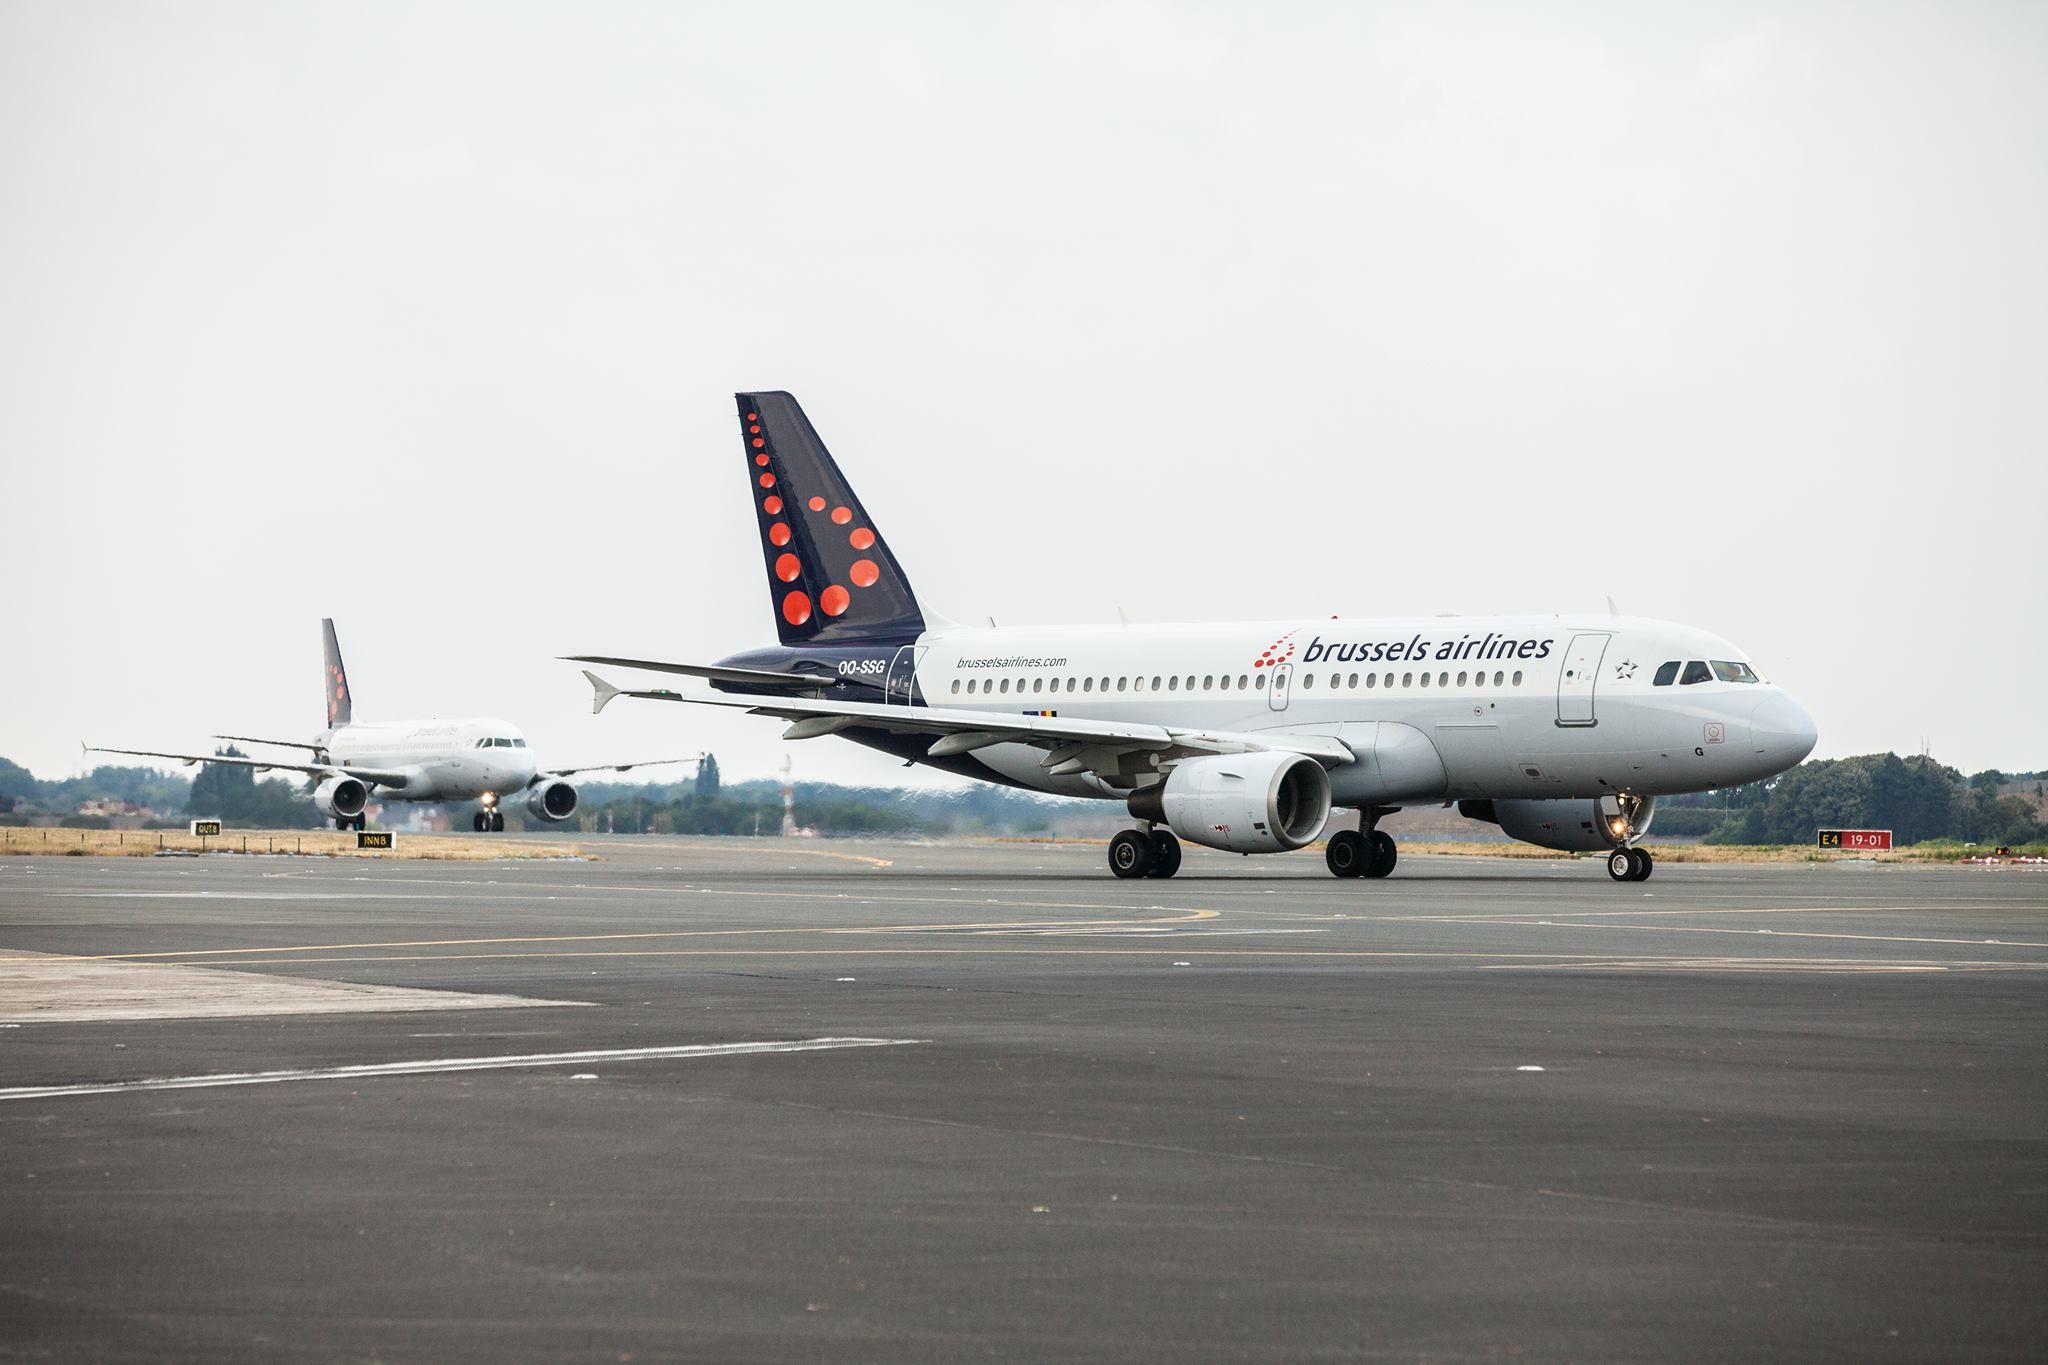 Brussels Airlines Airbus A319.